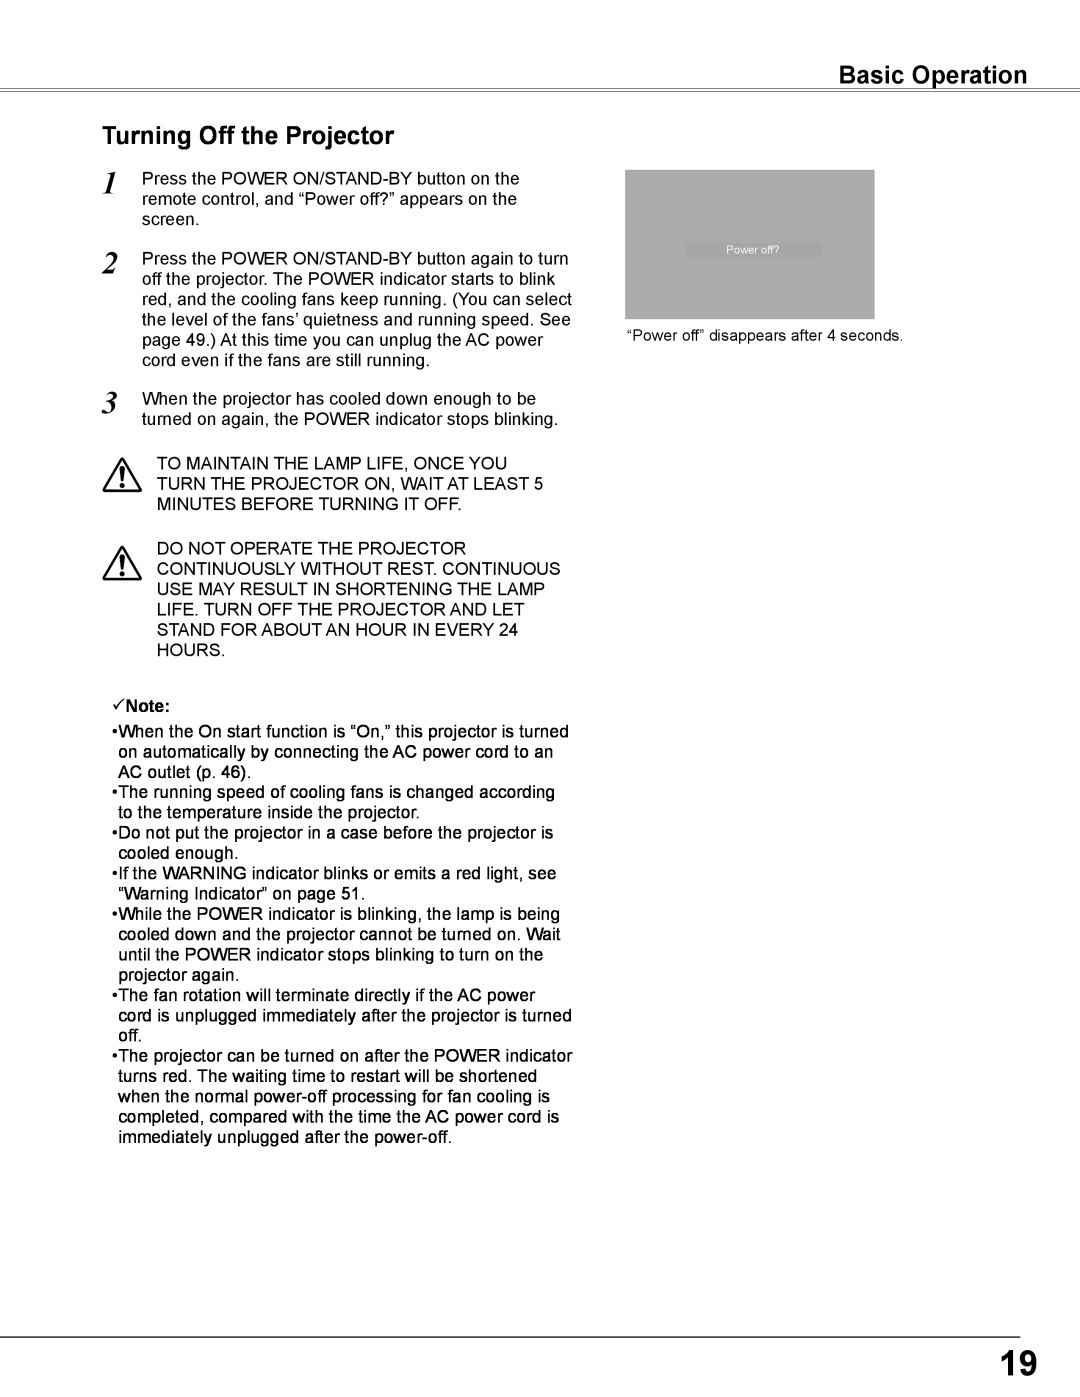 Sanyo PLC-WXL46 owner manual Basic Operation, Turning Off the Projector, Note 